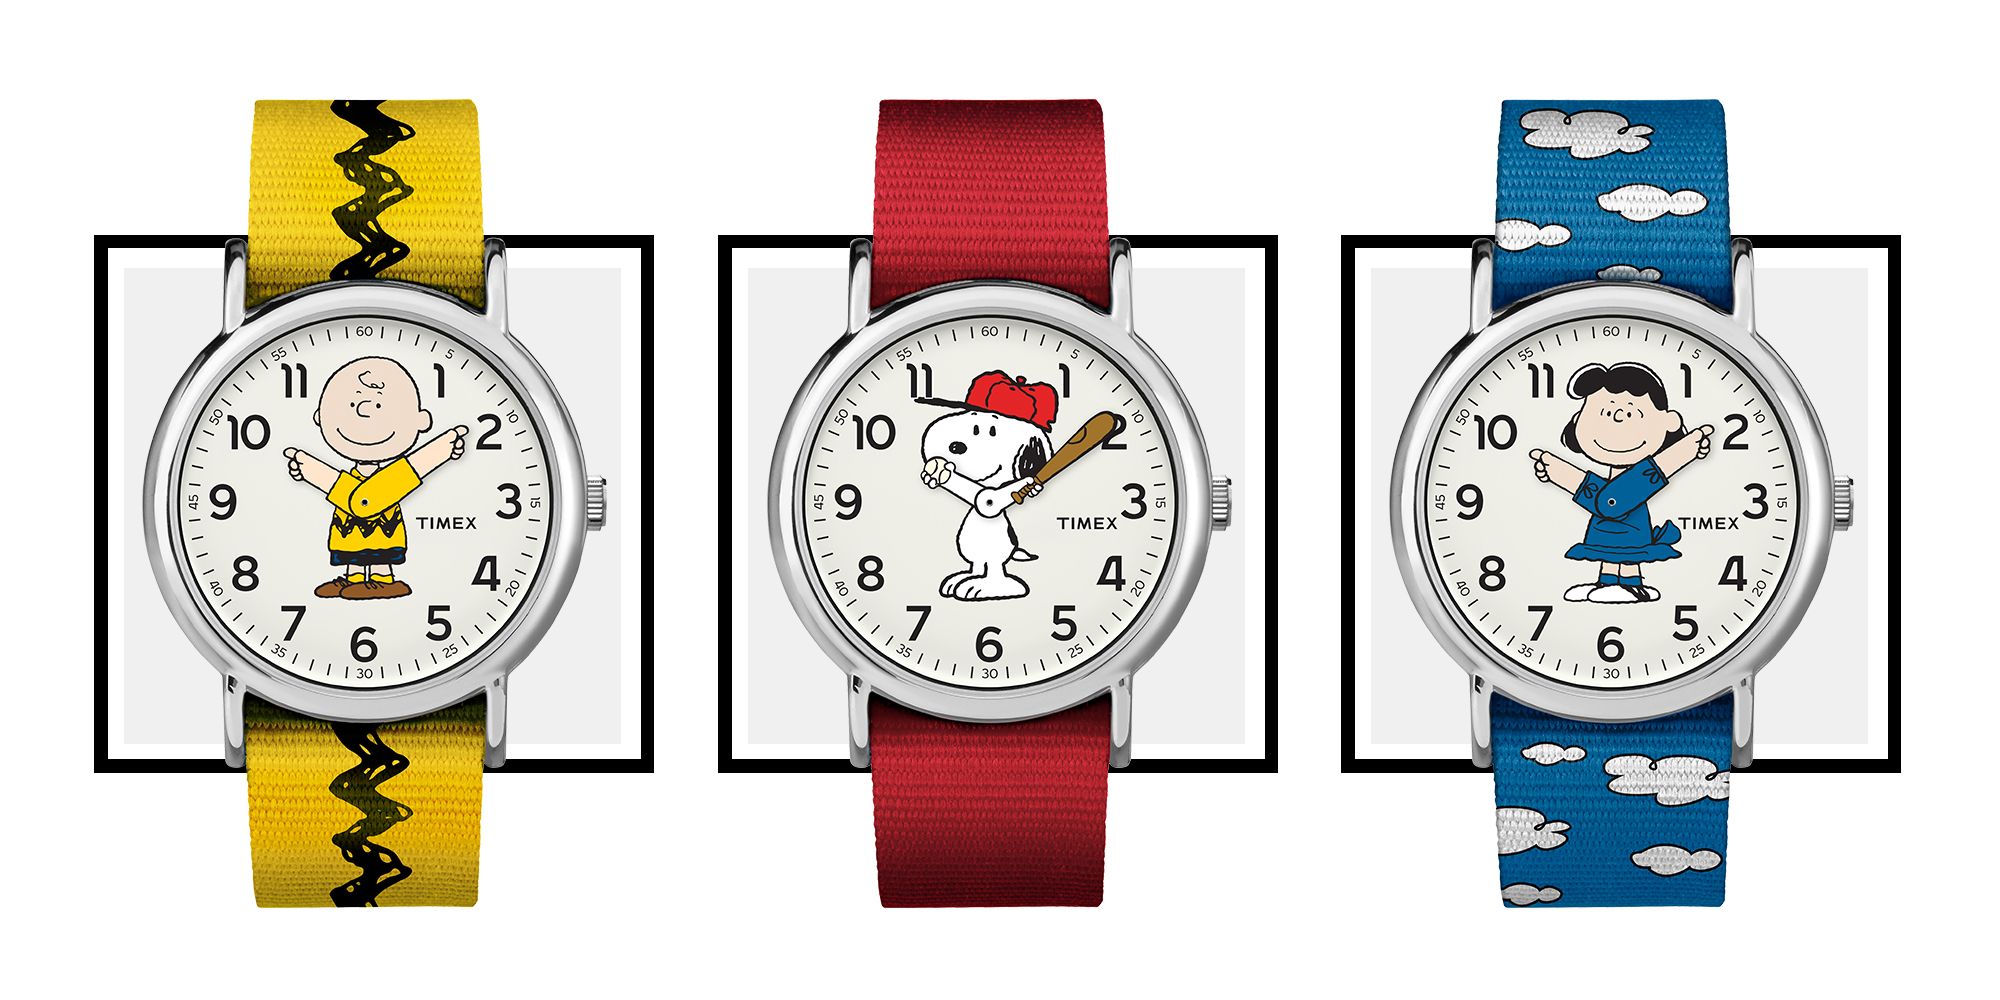 Peanuts Timex Watches Re-Released - Special Edition Peanuts Watch